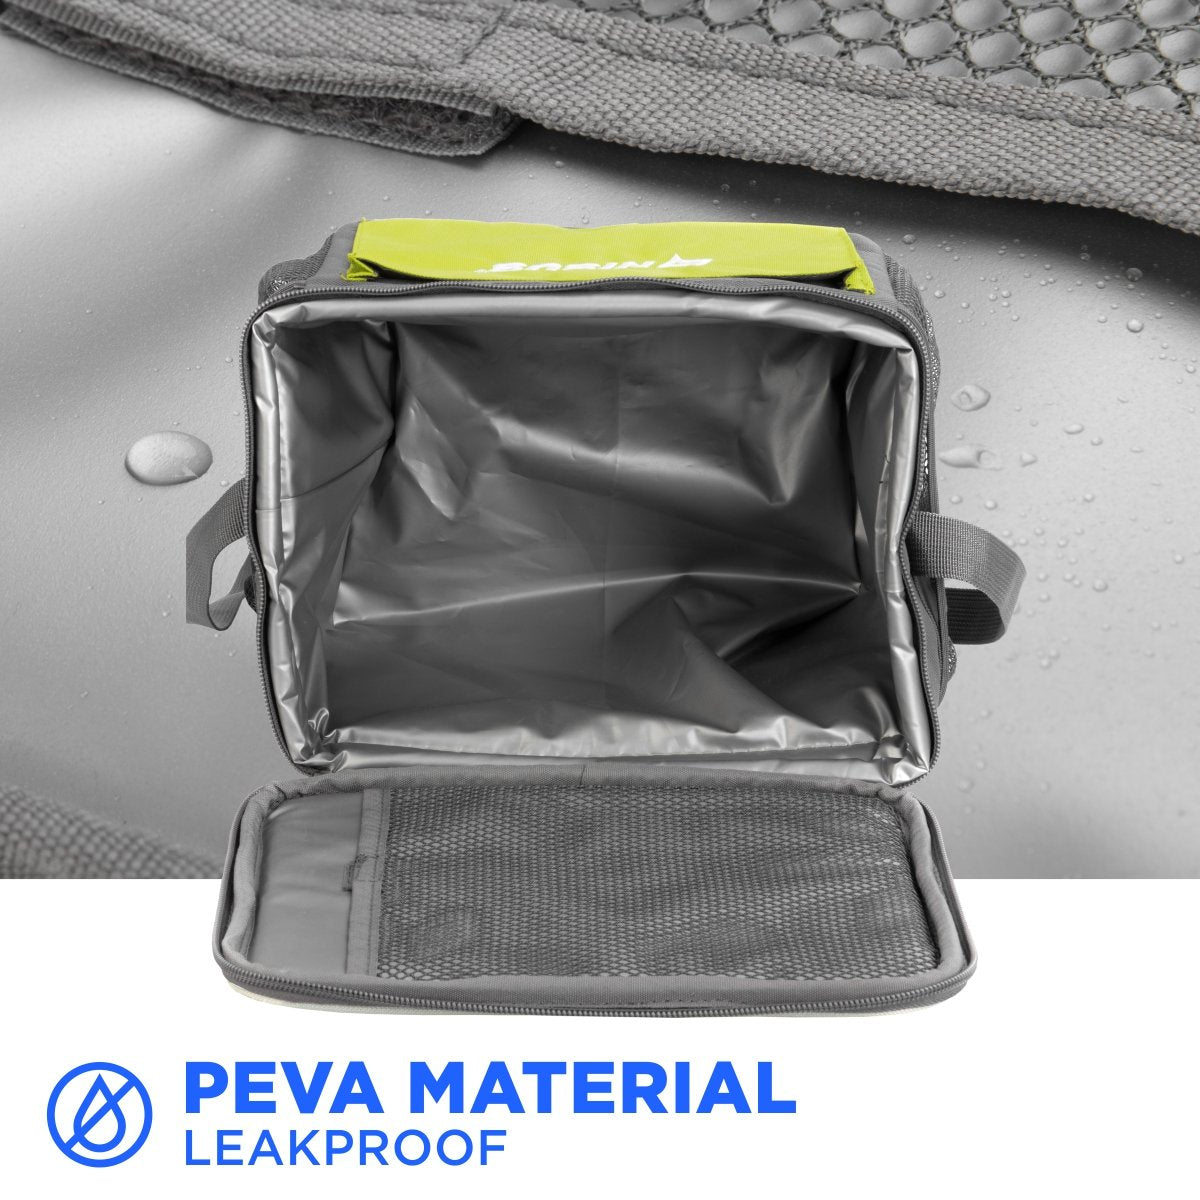 Beach Soft Sided Cooler Bag is insulated with PEVA leakproof material